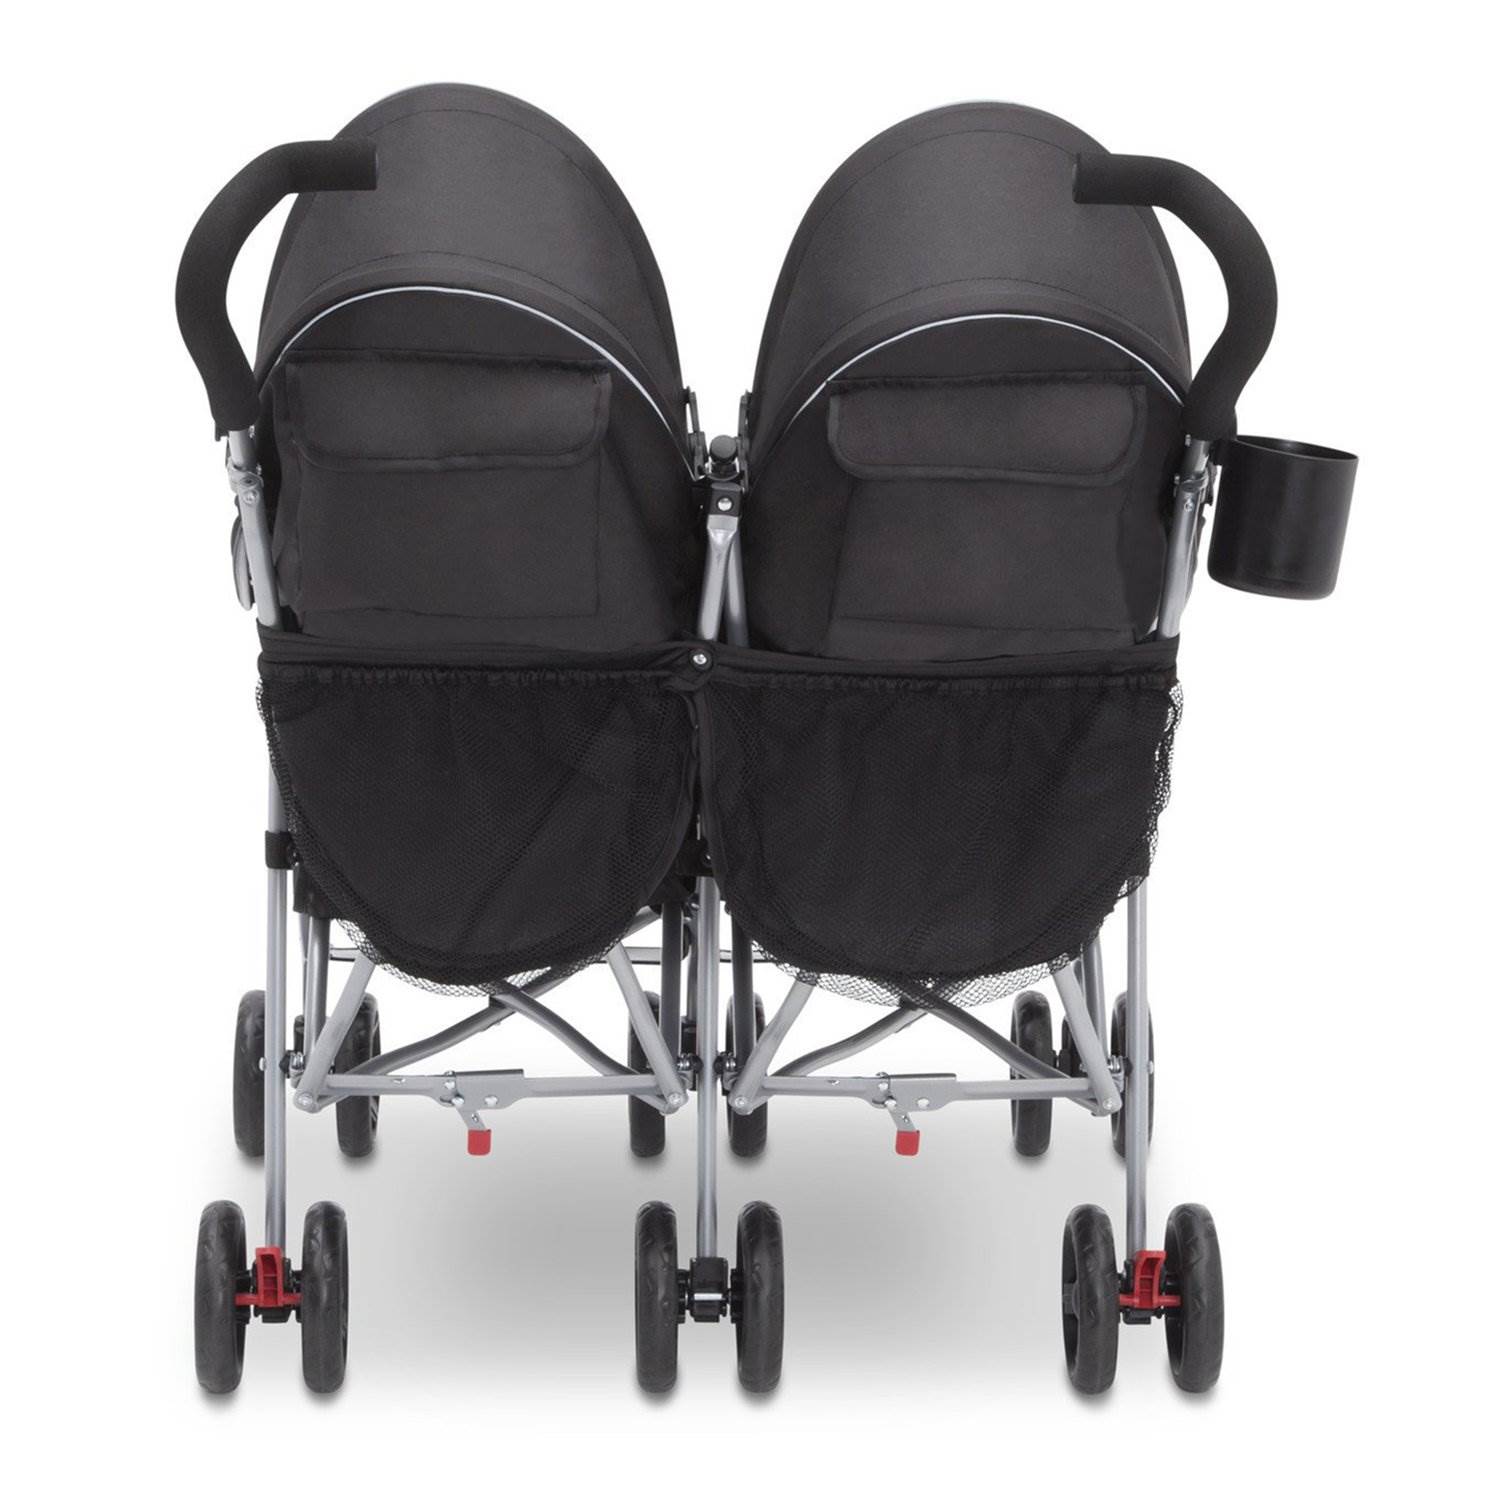 Delta Children LX 35 Pound Side by Side Double Convenience Stroller, Red & Gray - image 5 of 7